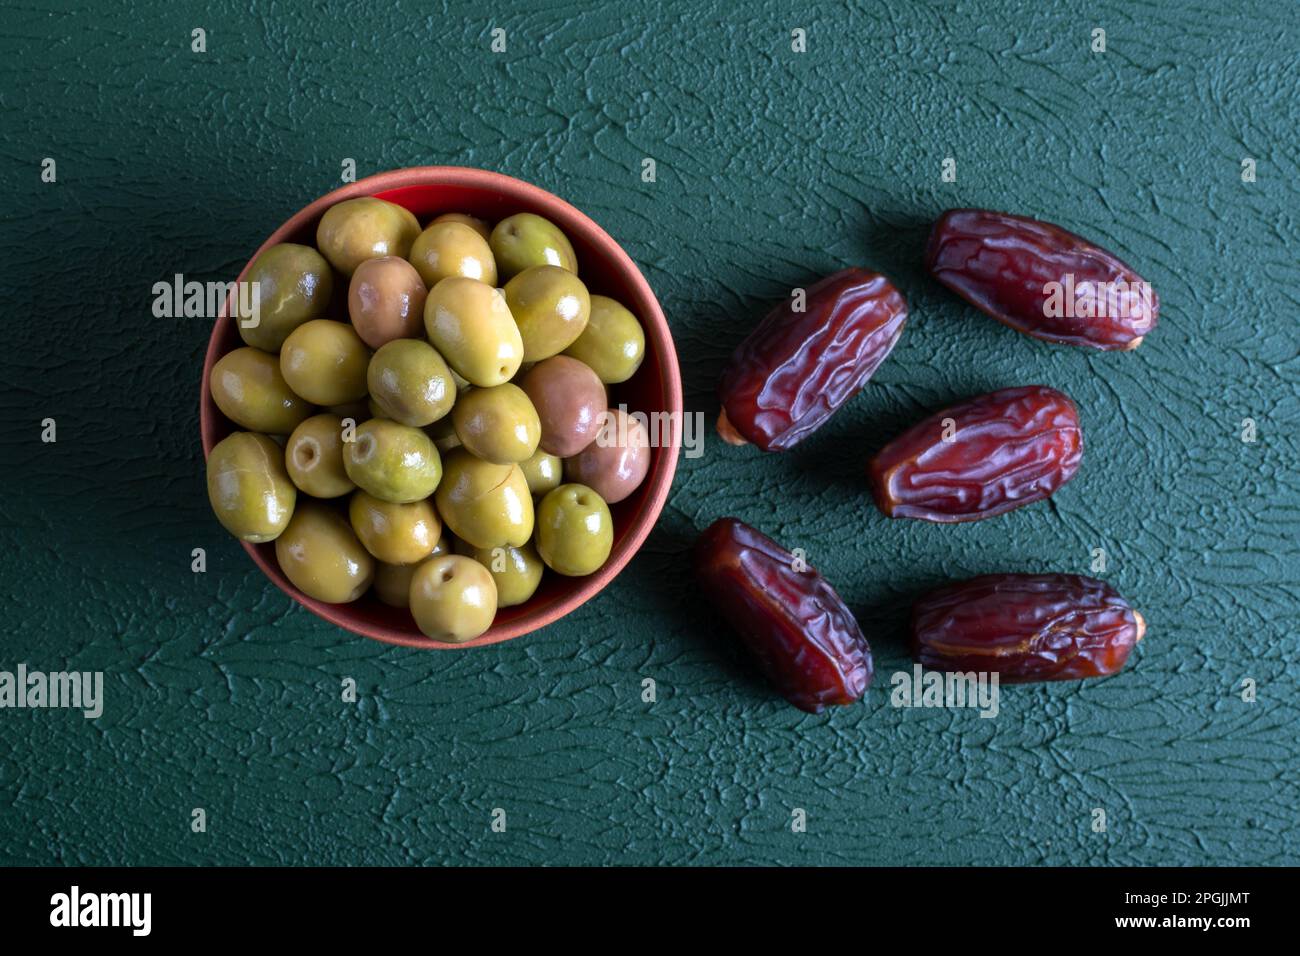 Date fruit with a bowl of green olive on a green background. Stock Photo